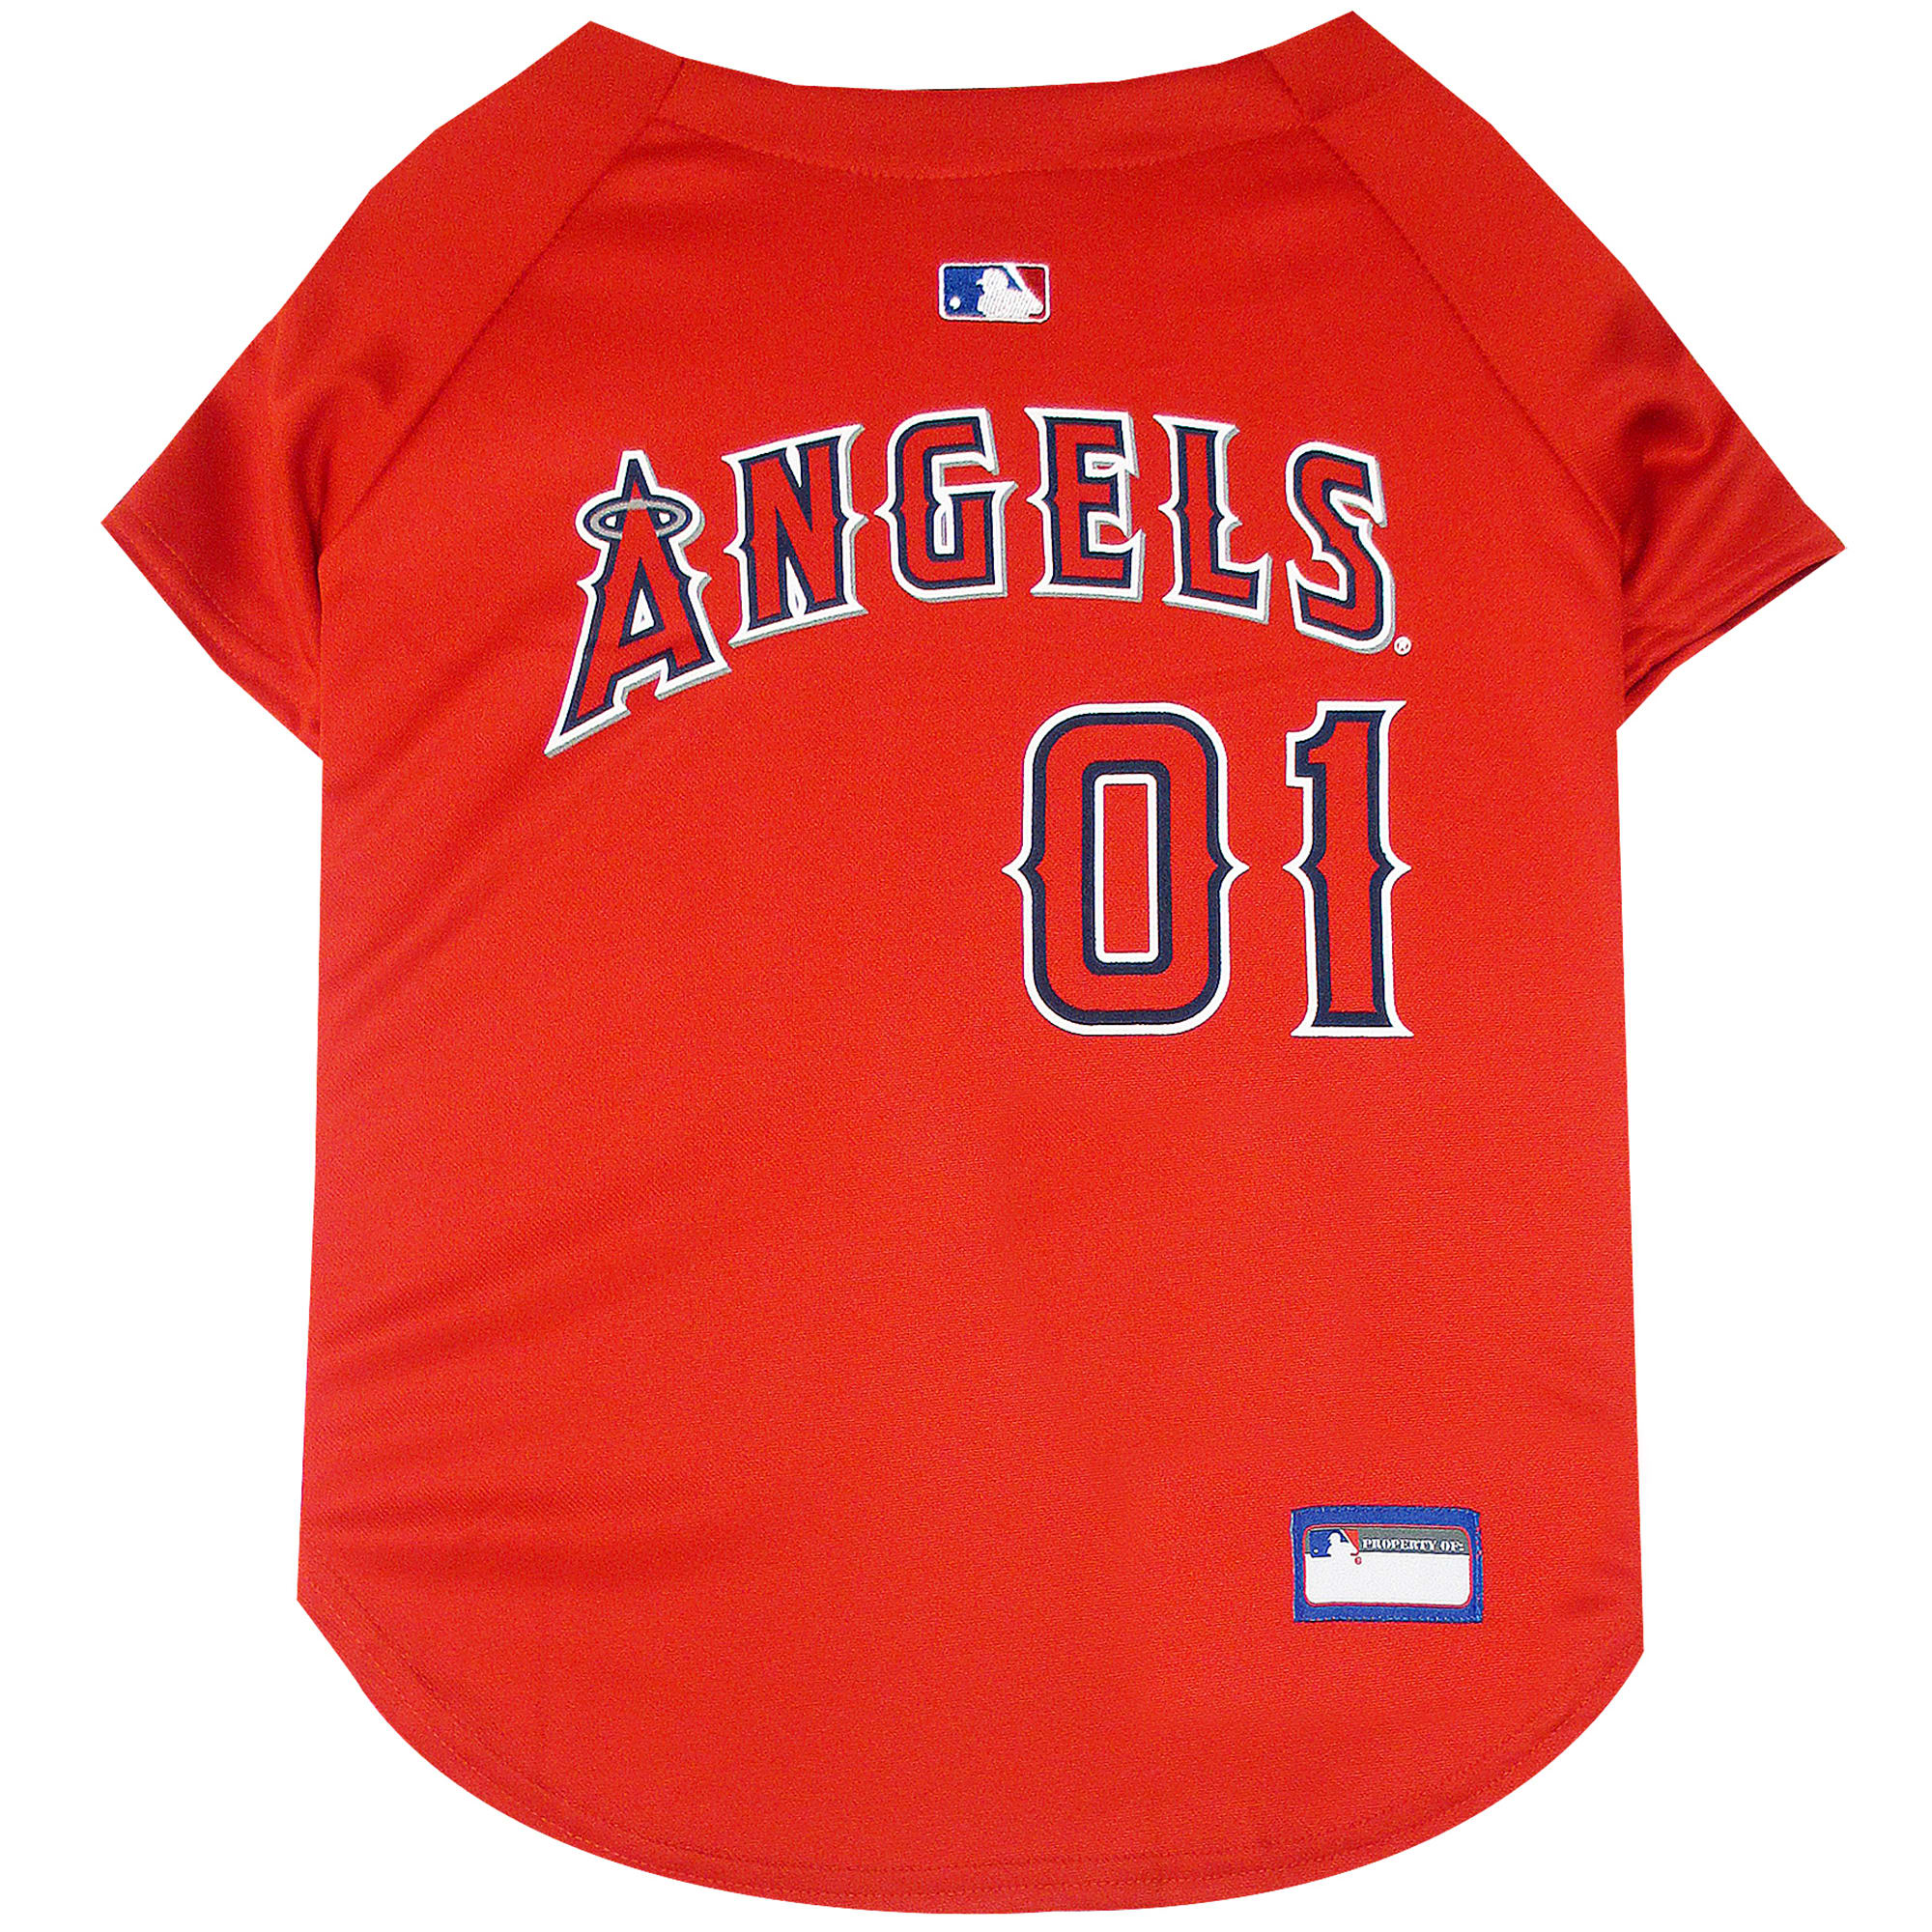 jersey angels